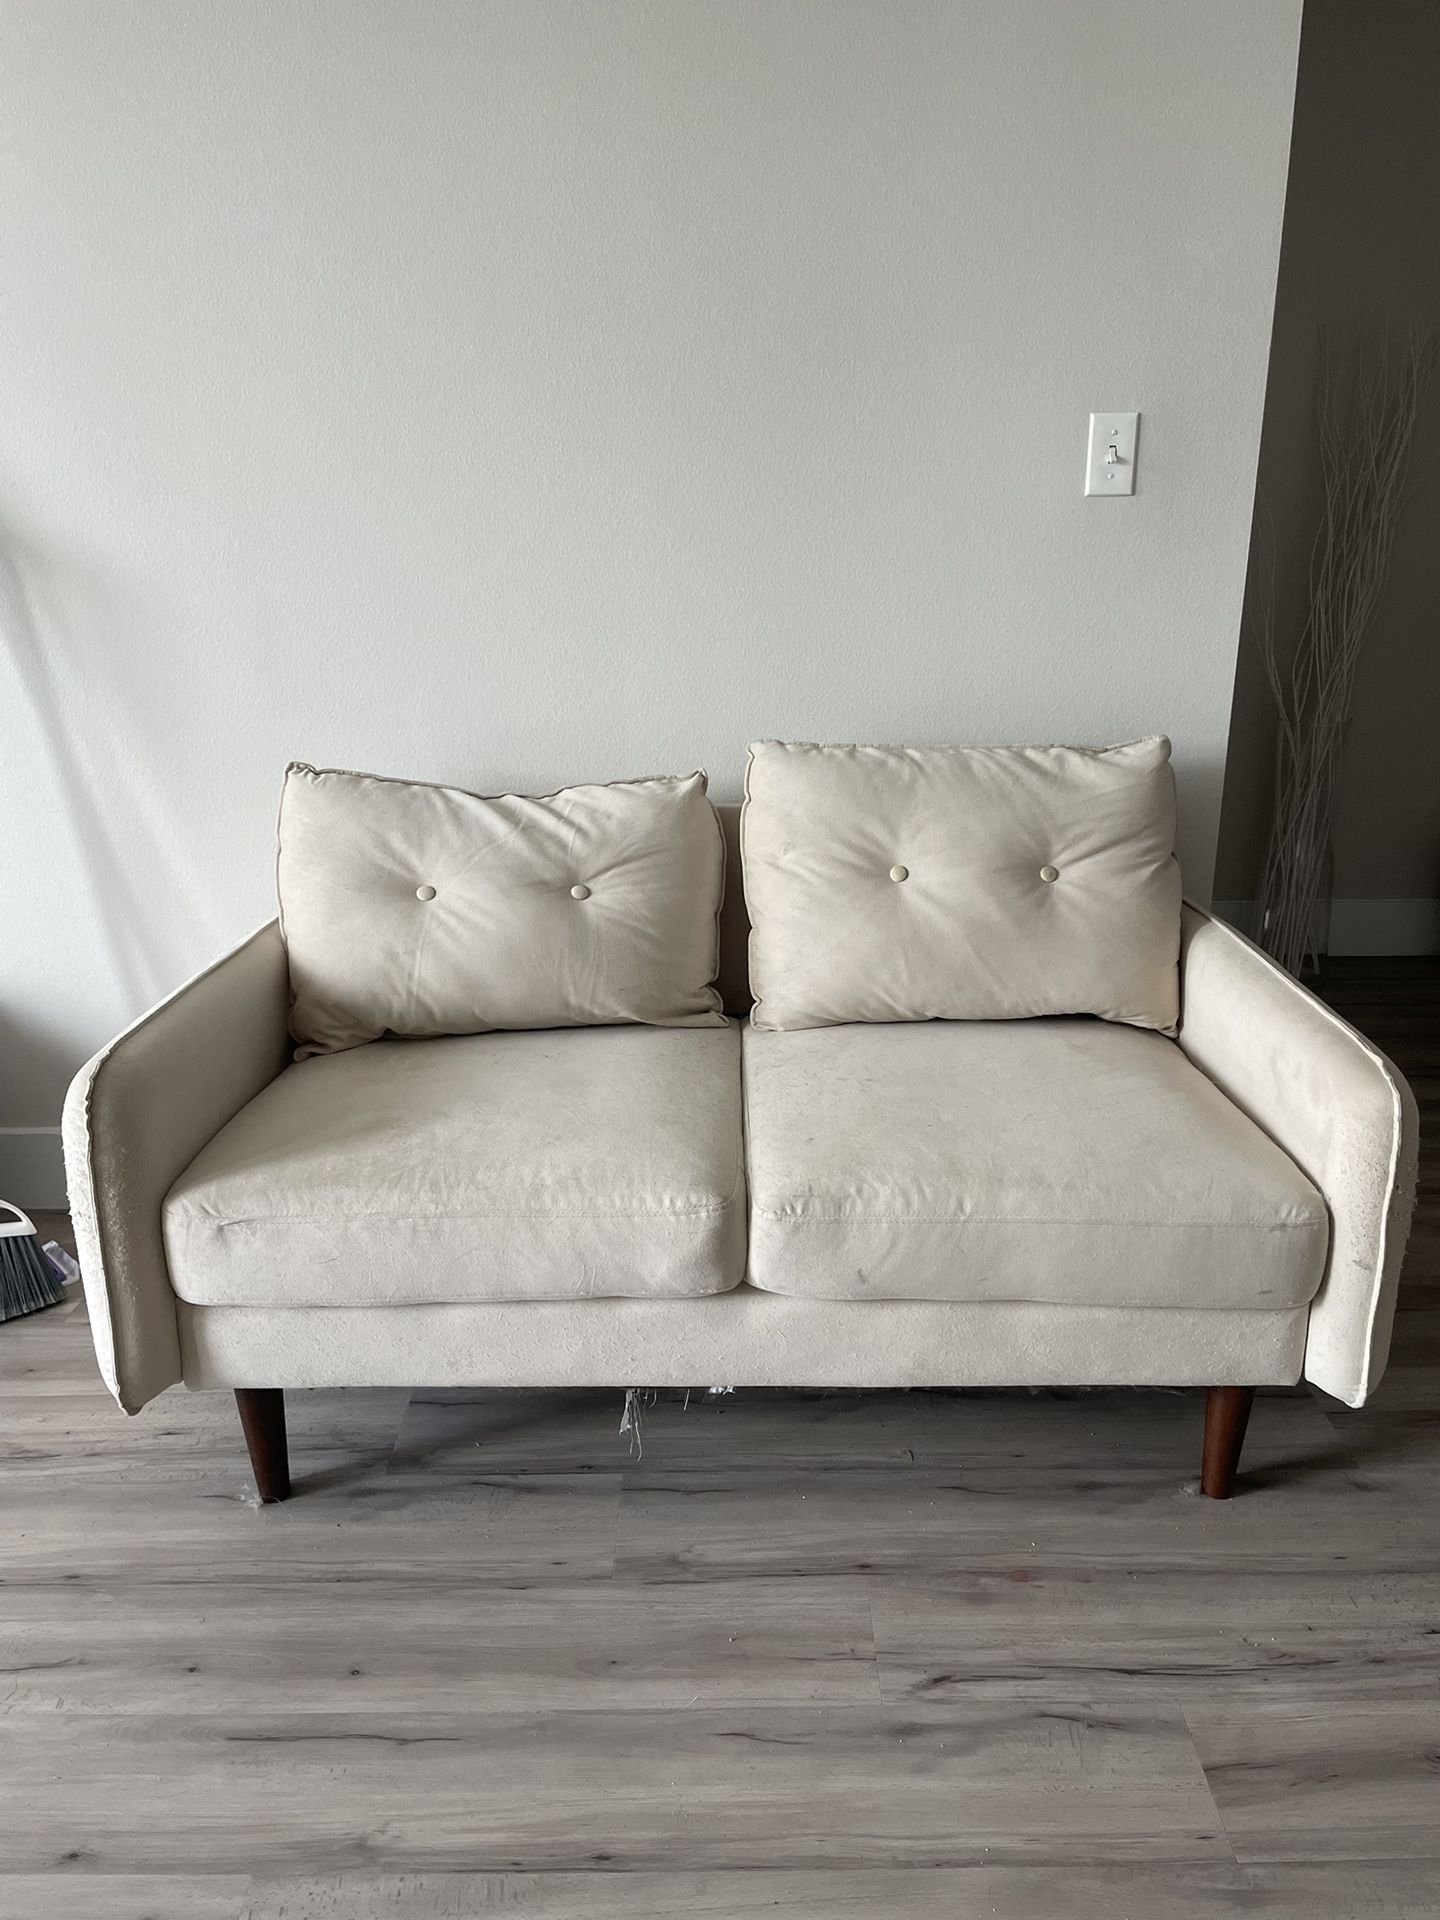 small couch for sale $125 obo